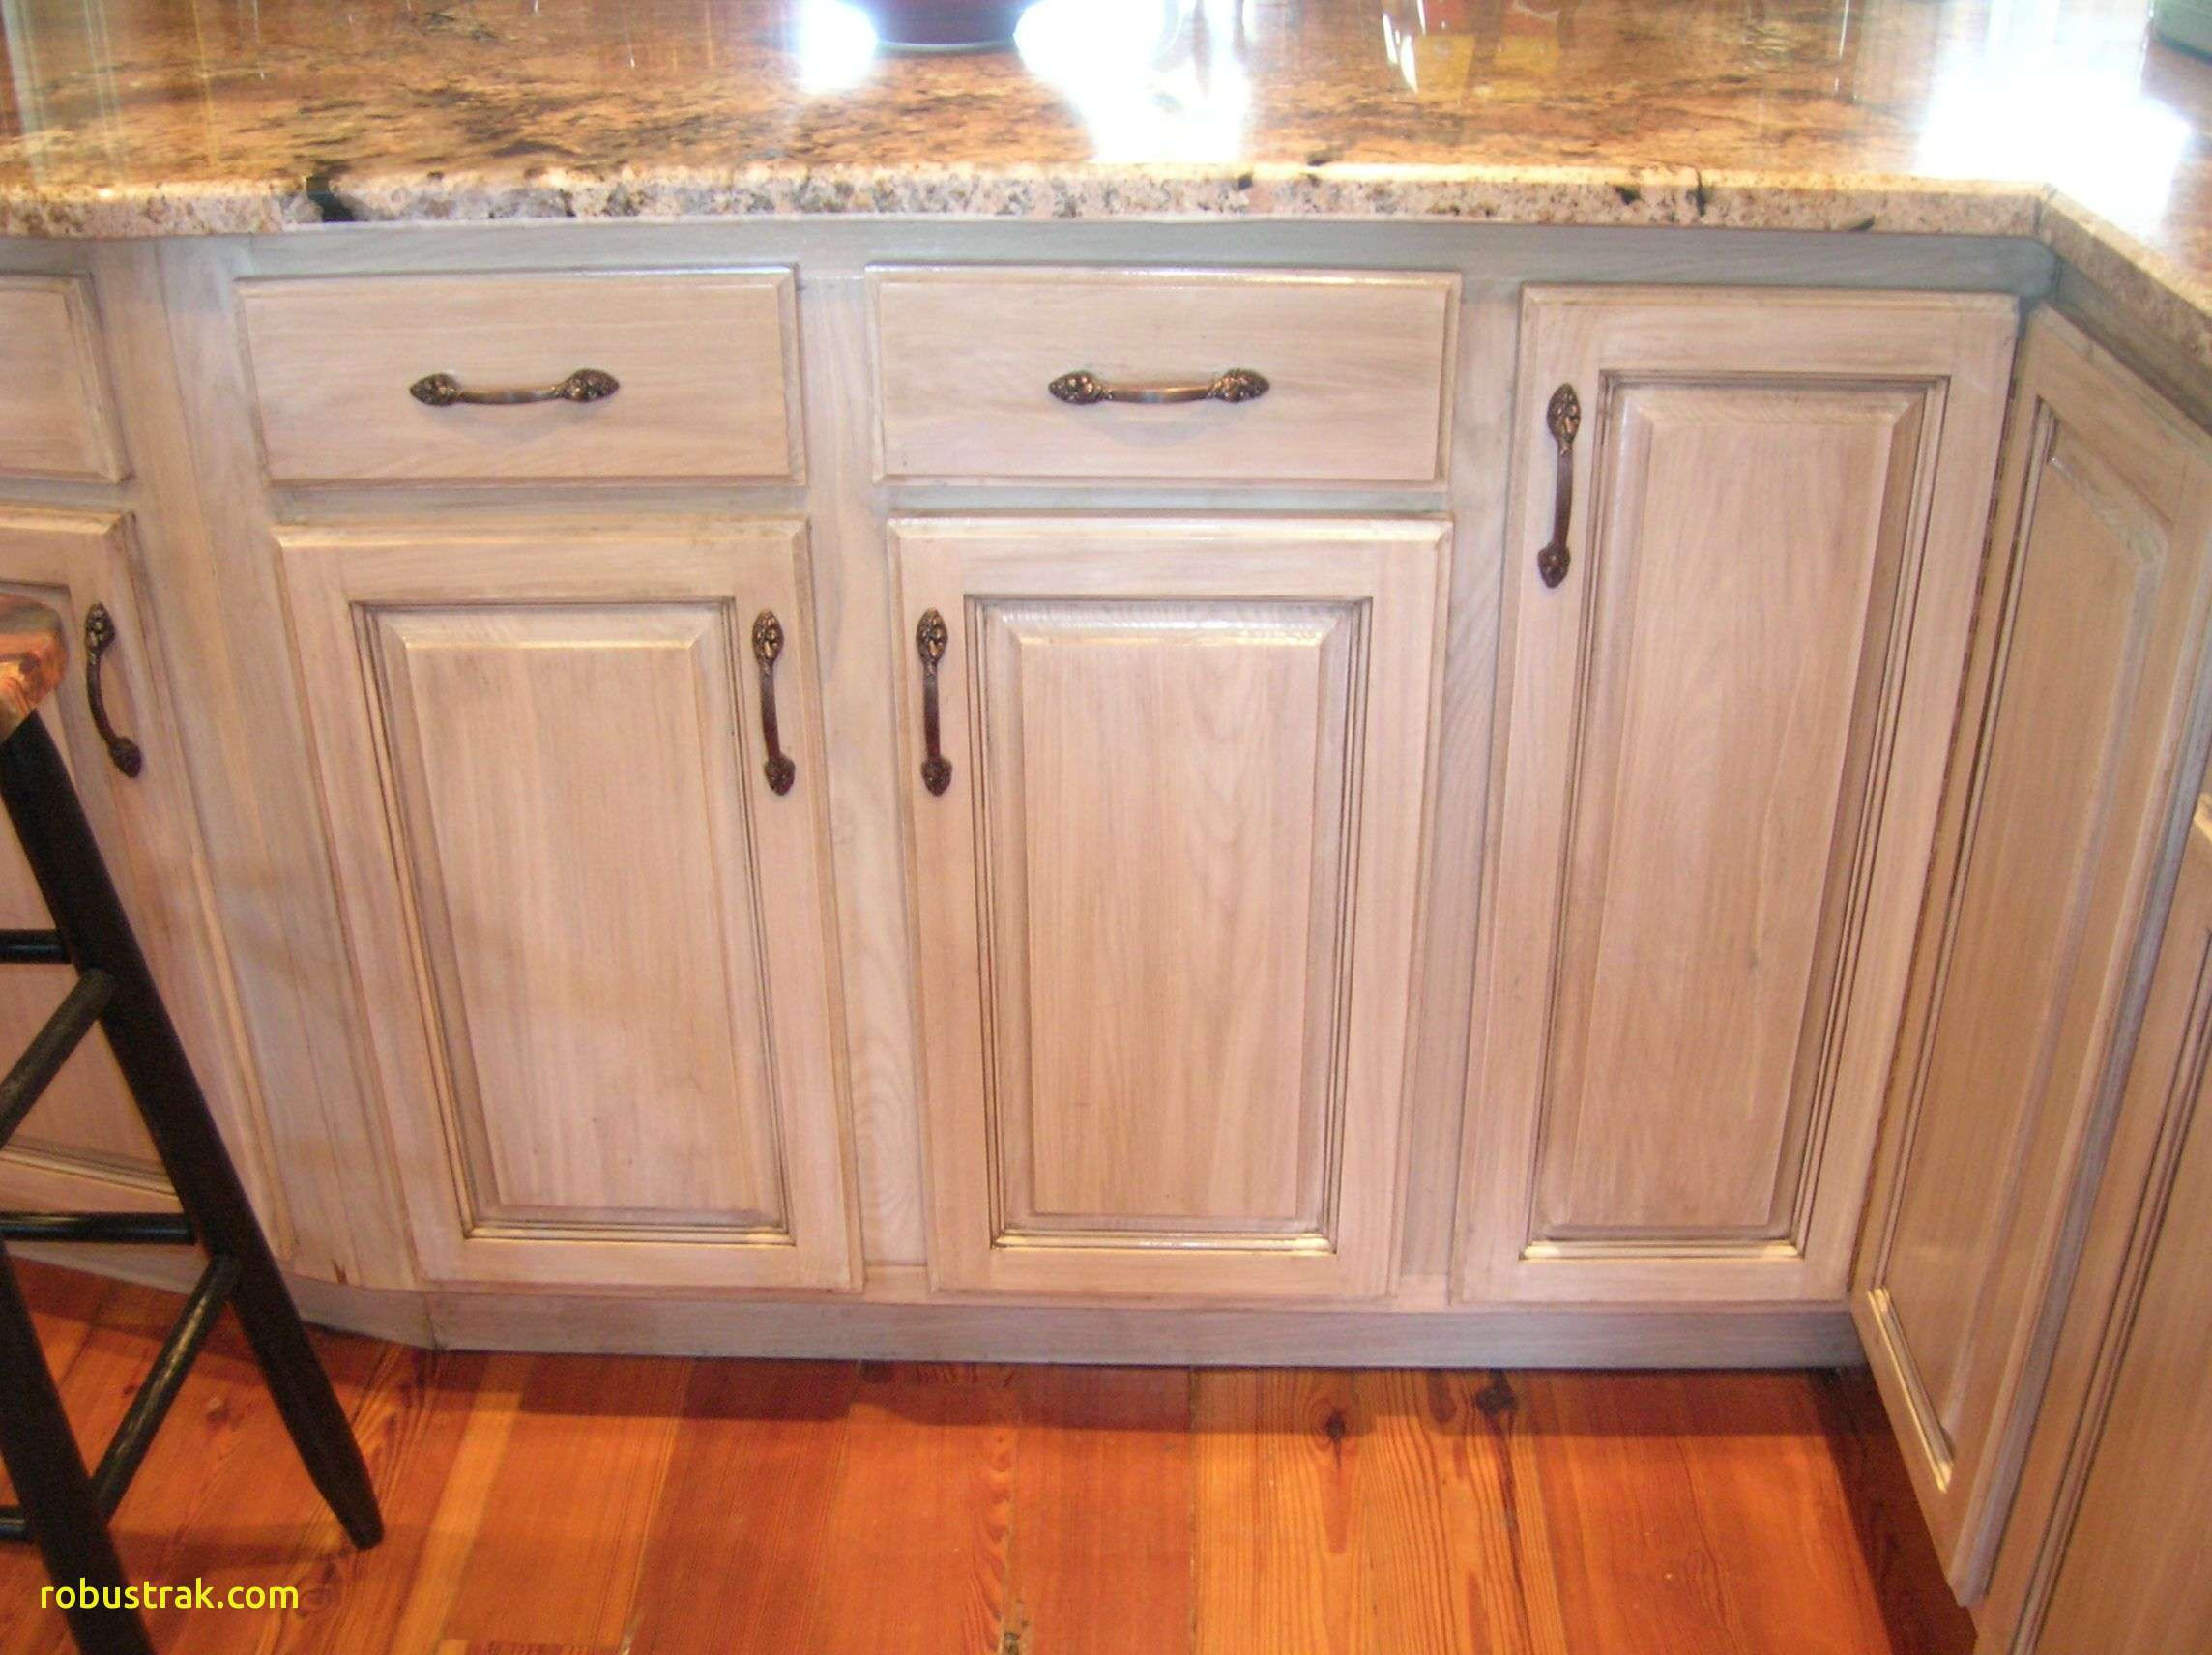 hardwood floor stain colors oak of cabinet stain colors unique pickled oak cabinets with cabinet stain colors unique pickled oak cabinets of cabinet stain colors